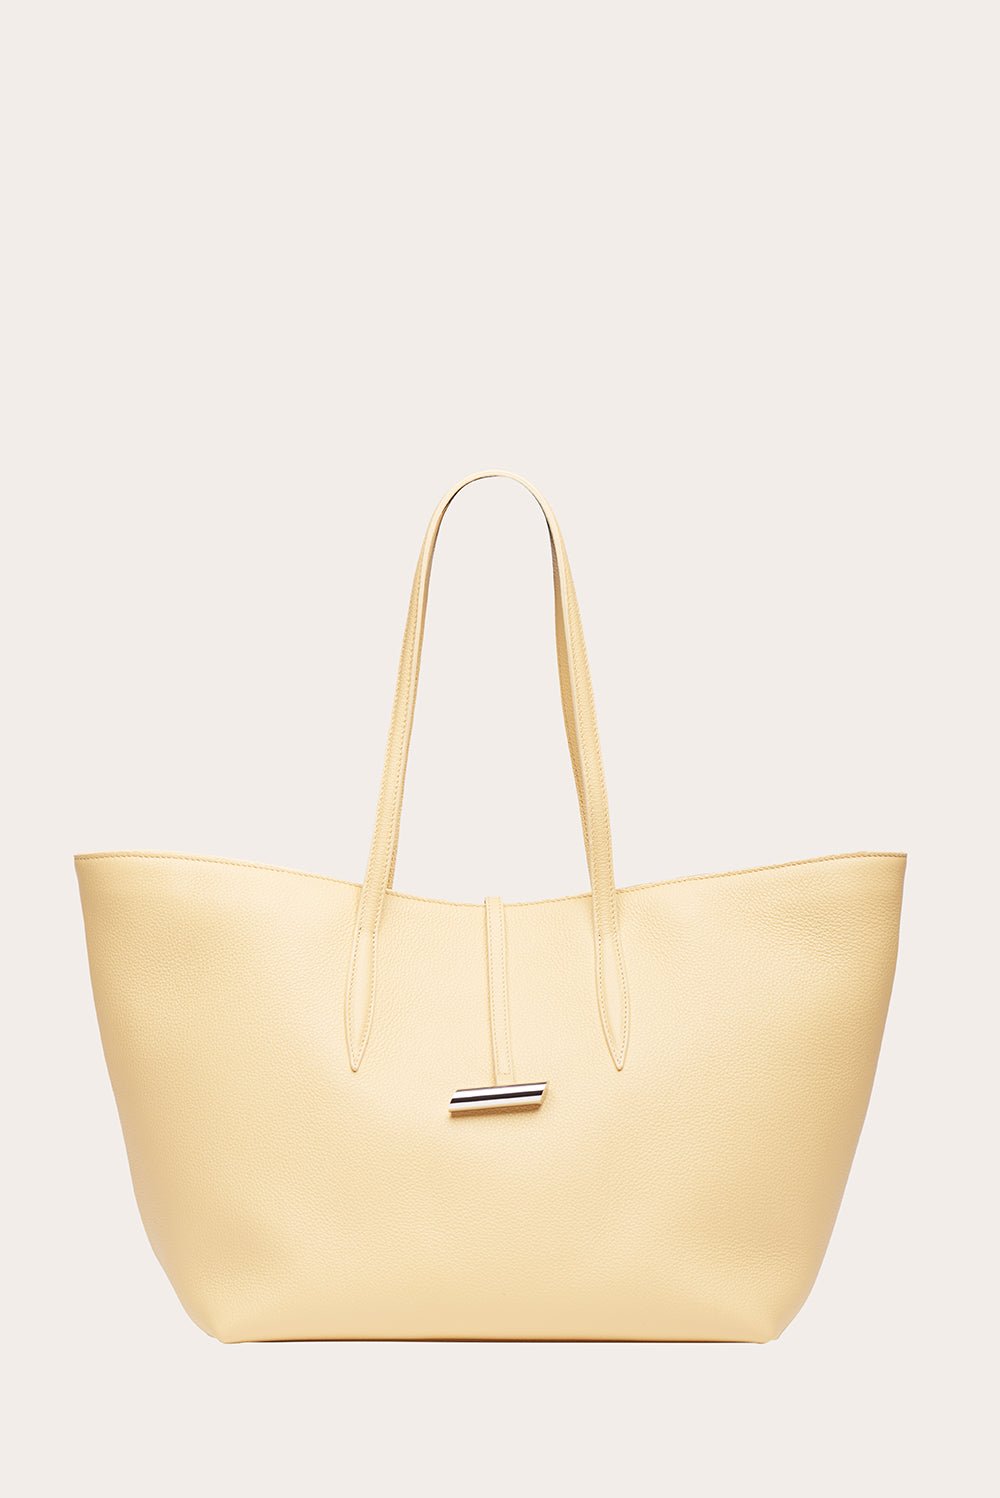 Little Liffner Penne Tote Almond In Neutral